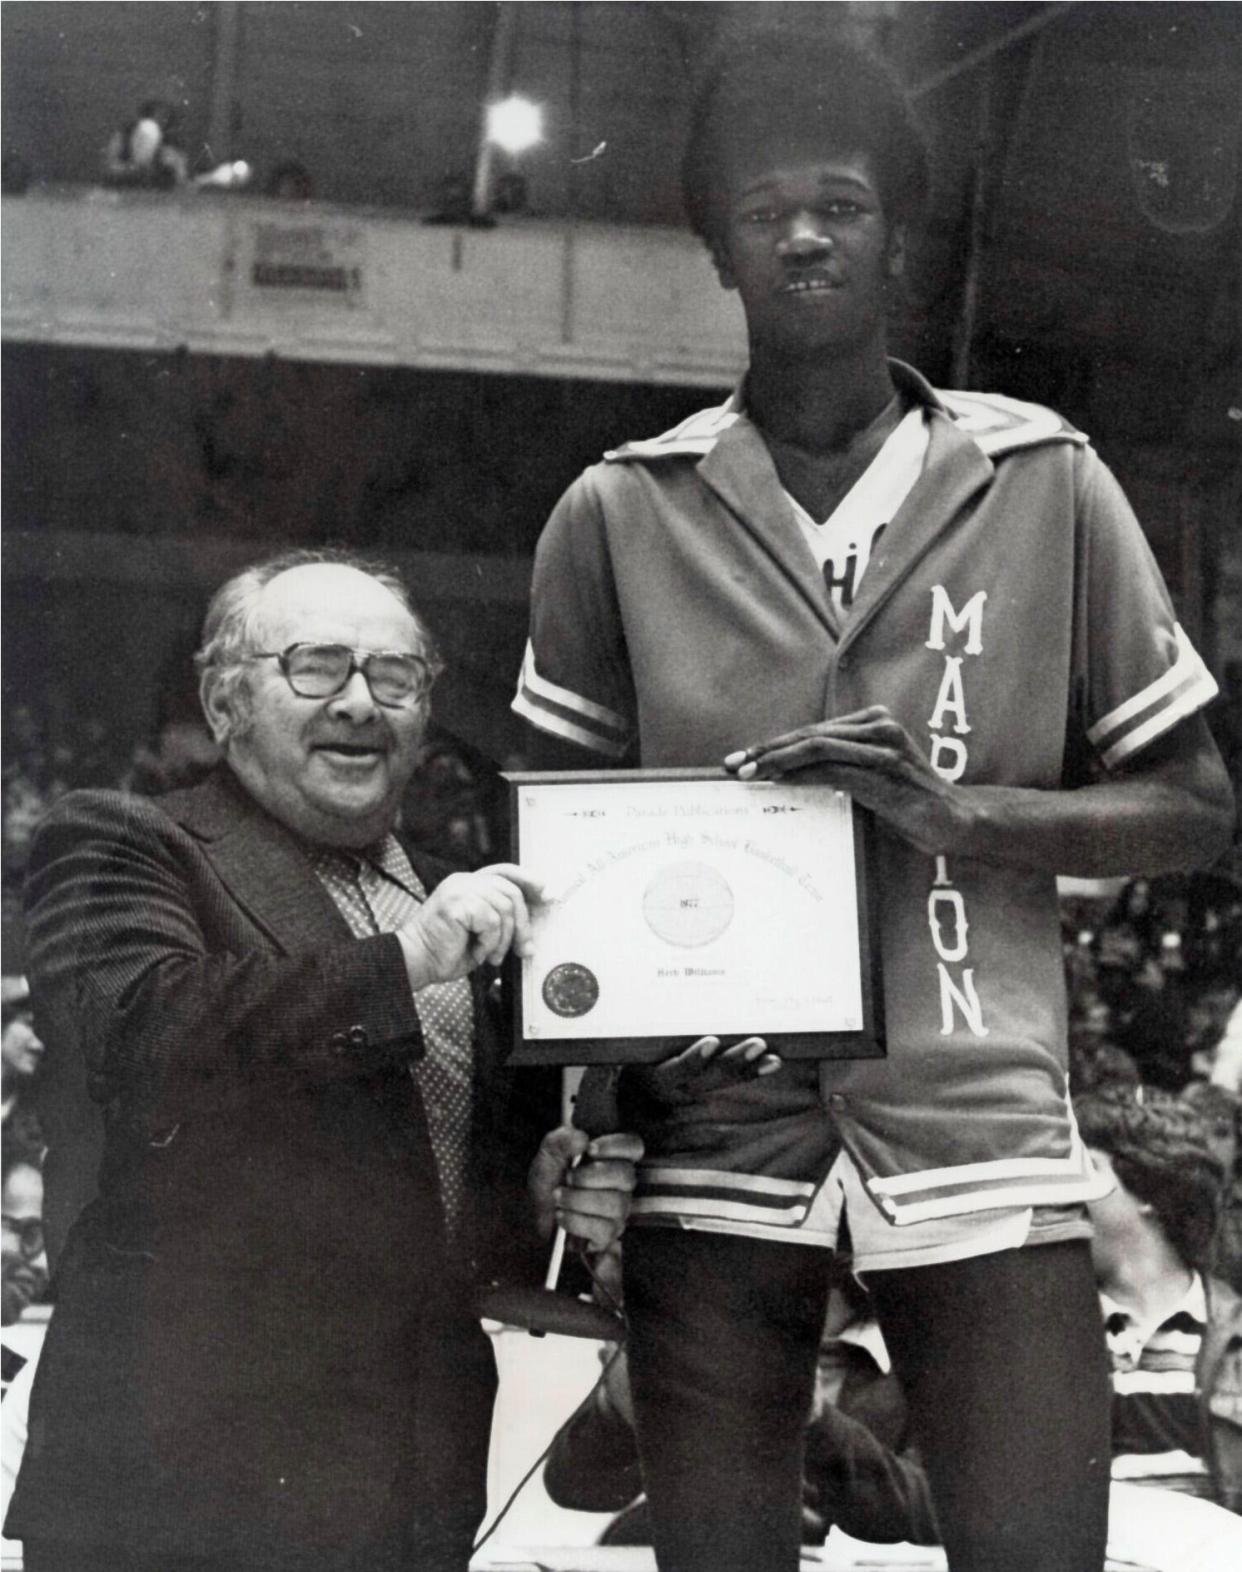 This April 7, 1977, photo shows Lou Berliner, left, with Herb Williams of Marion-Franklin High School. The plaque honors Williams' selection for the All-American High School Basketball Team. A local legend, Williams went on to play for Ohio State and the Indiana Pacers.